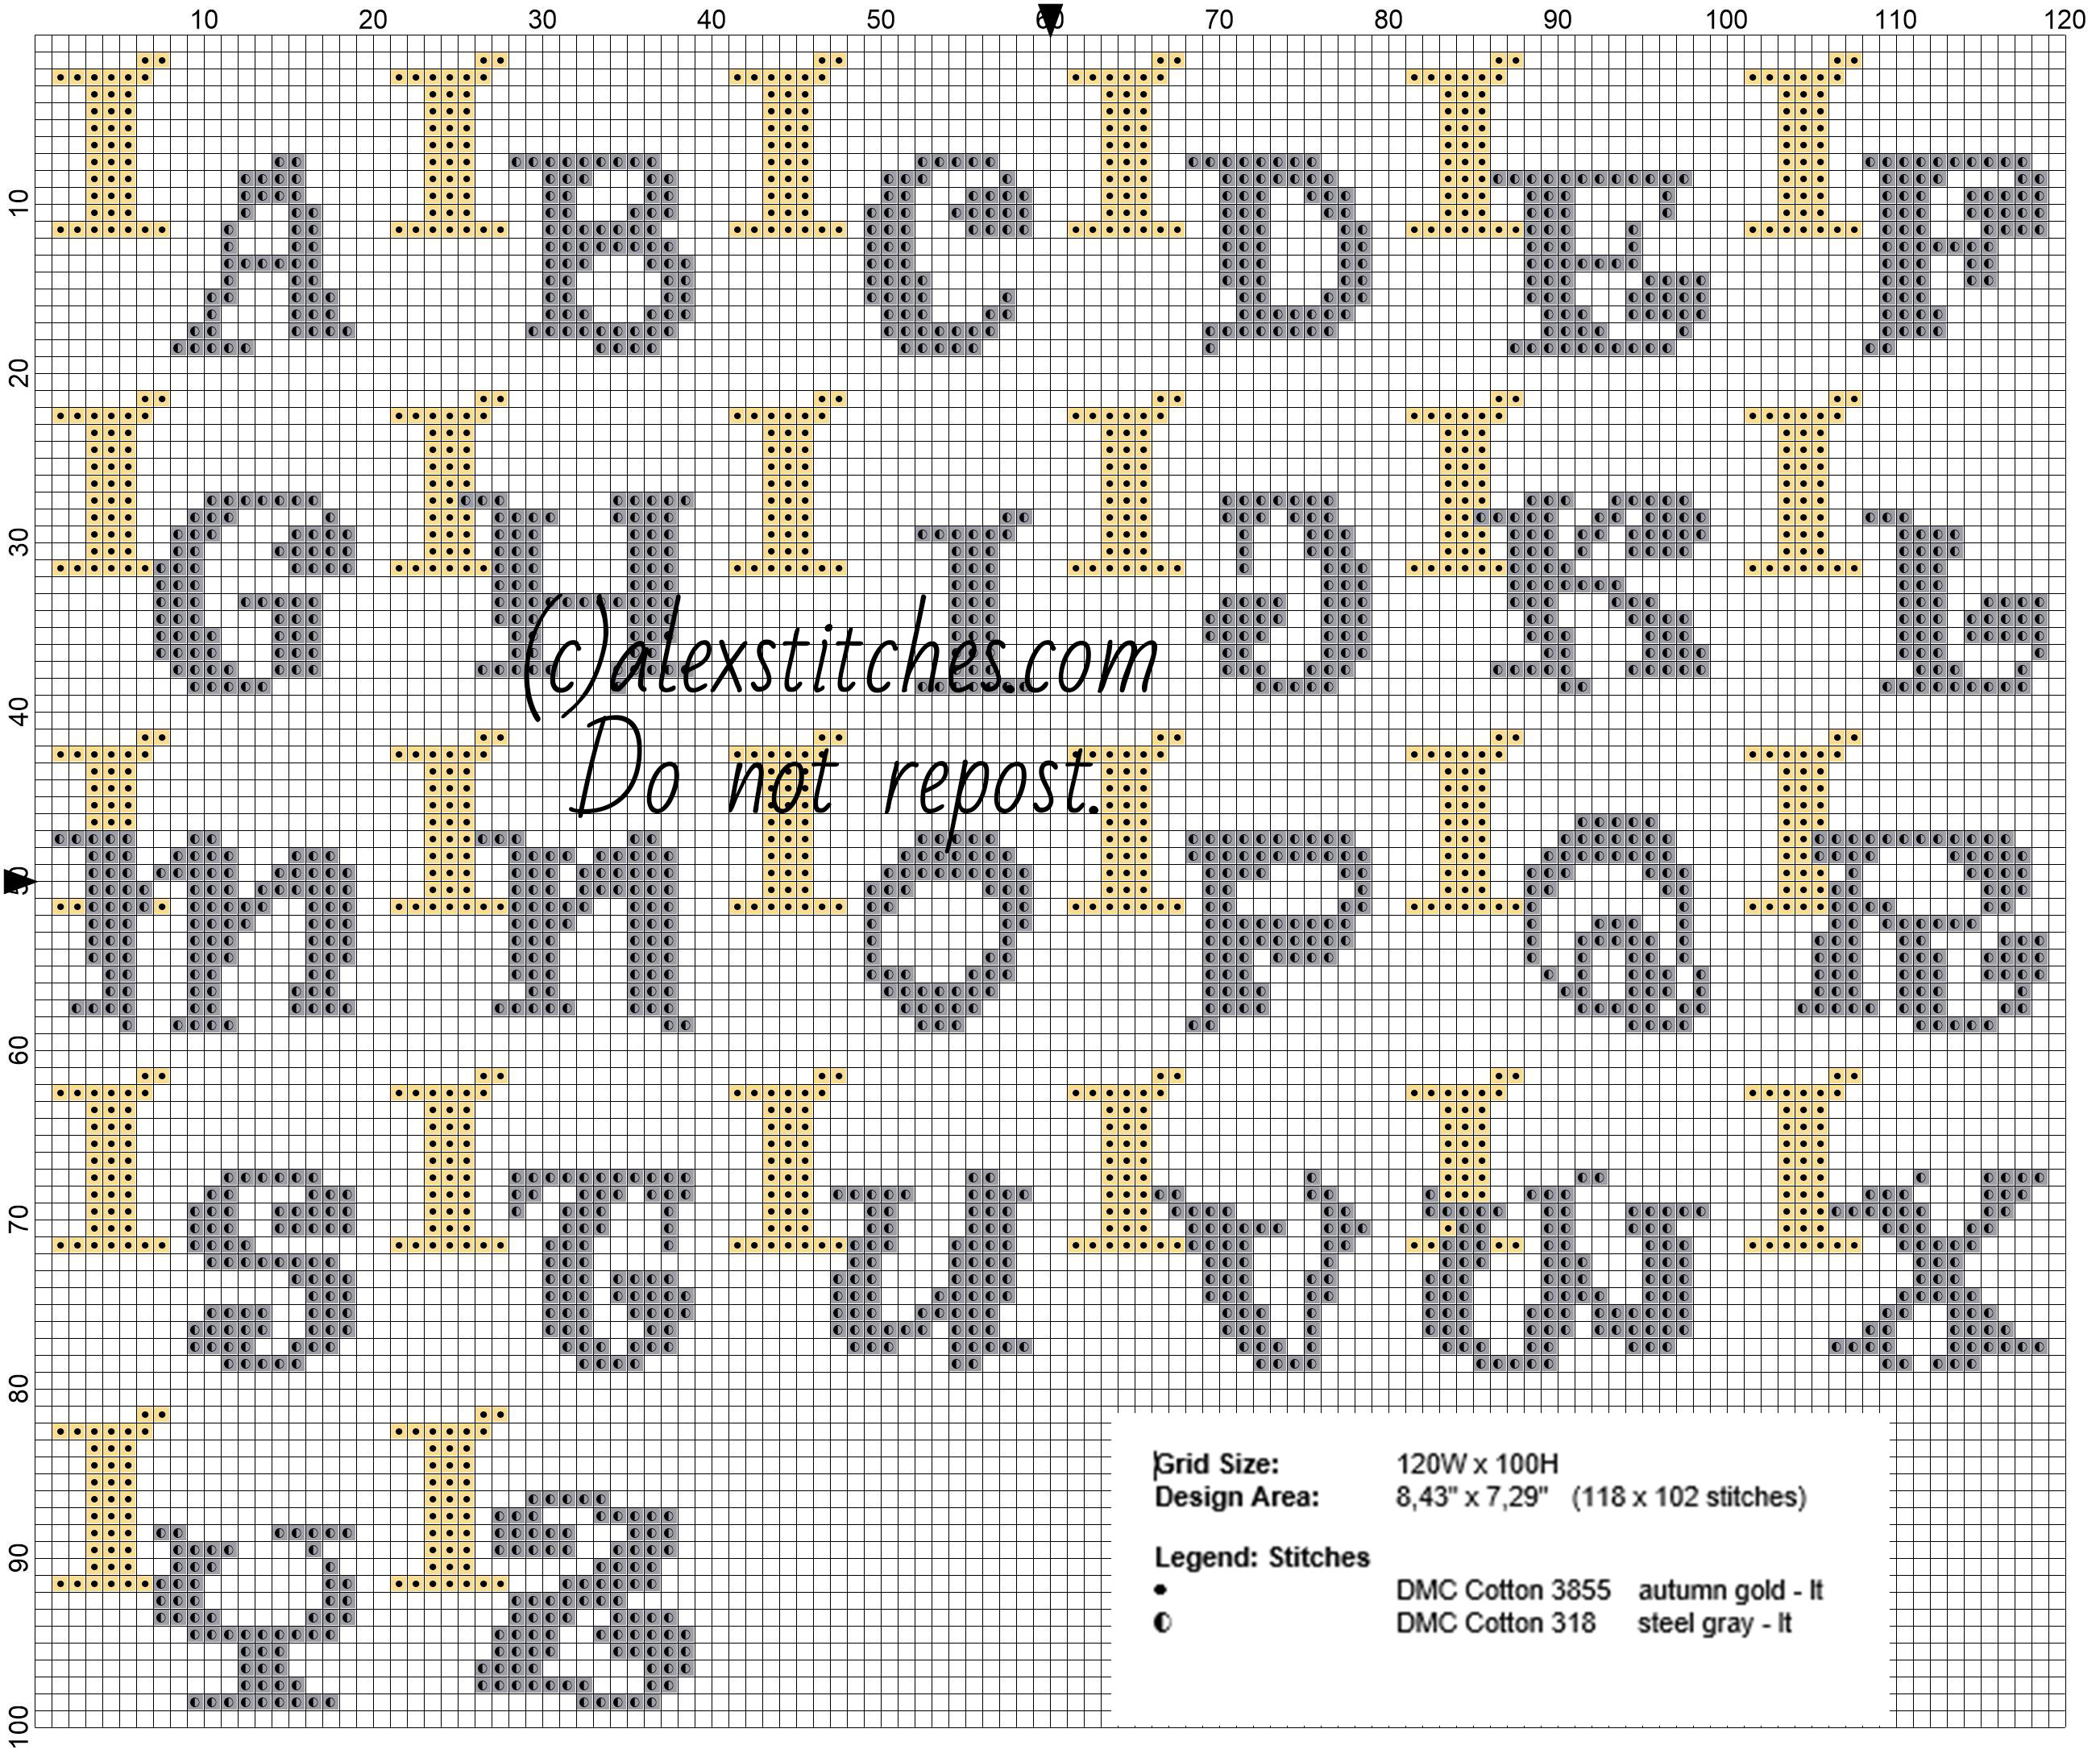 Cross stitch initials gold and silver letters I about 20 x 20 stitches size free pattern download